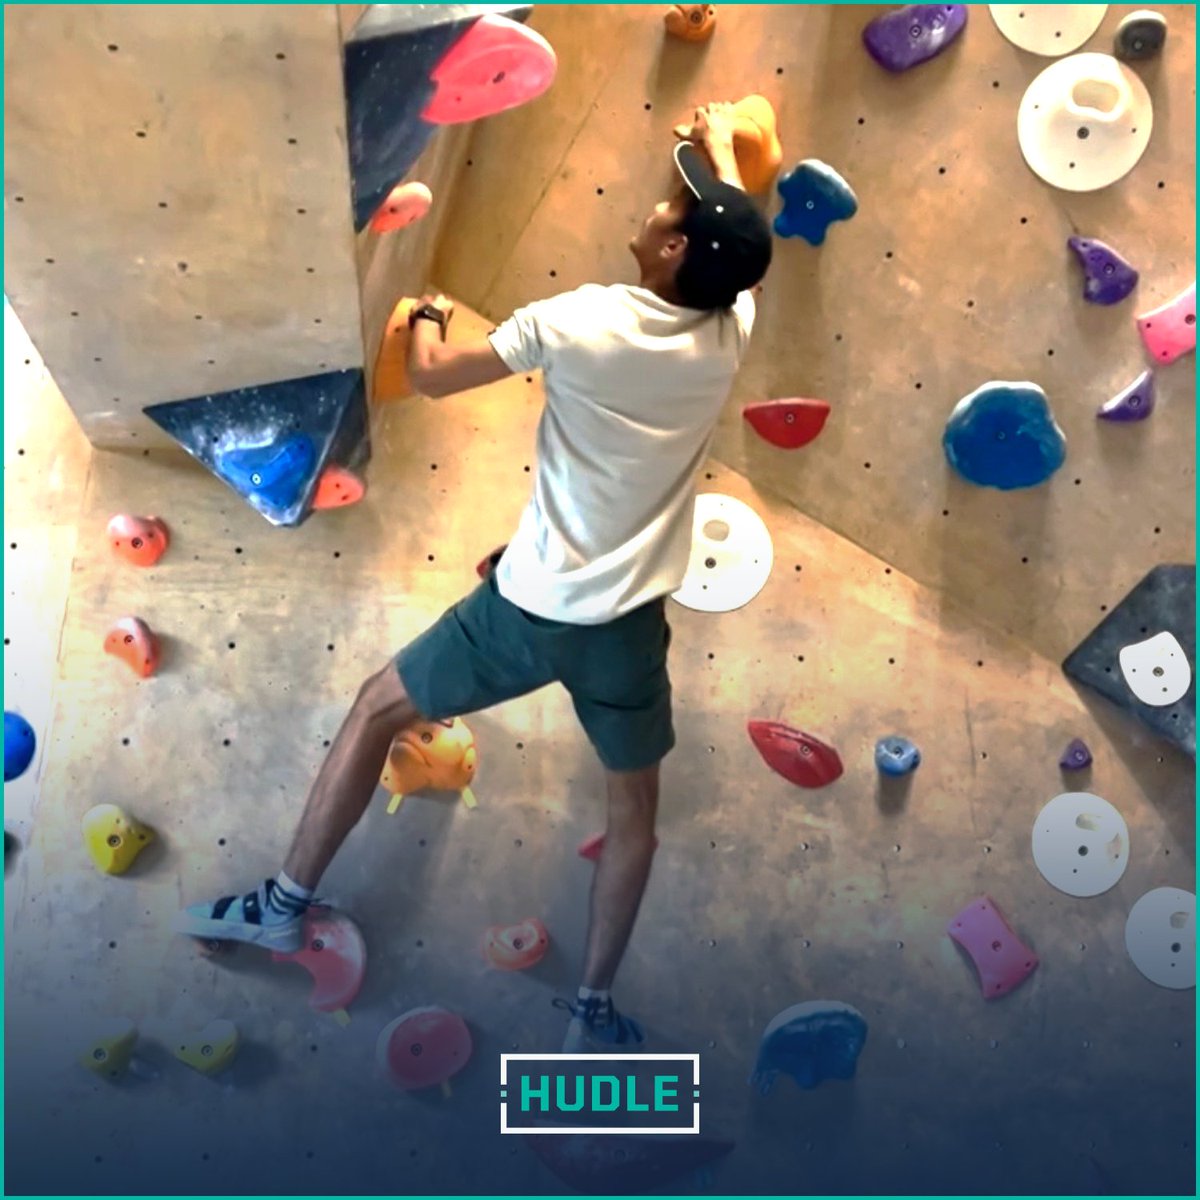 🧗‍♀️🌈 Conquer walls, feel the rush, and aim higher with bouldering! 🚀 💪 Challenge yourself, have a blast, and get a full-body workout! Find bouldering near you on Hudle. 📍 Don't miss out on this epic experience! #HudlePlay #Bouldering #IndoorClimbing #AdventureAwaits 📱🏞️